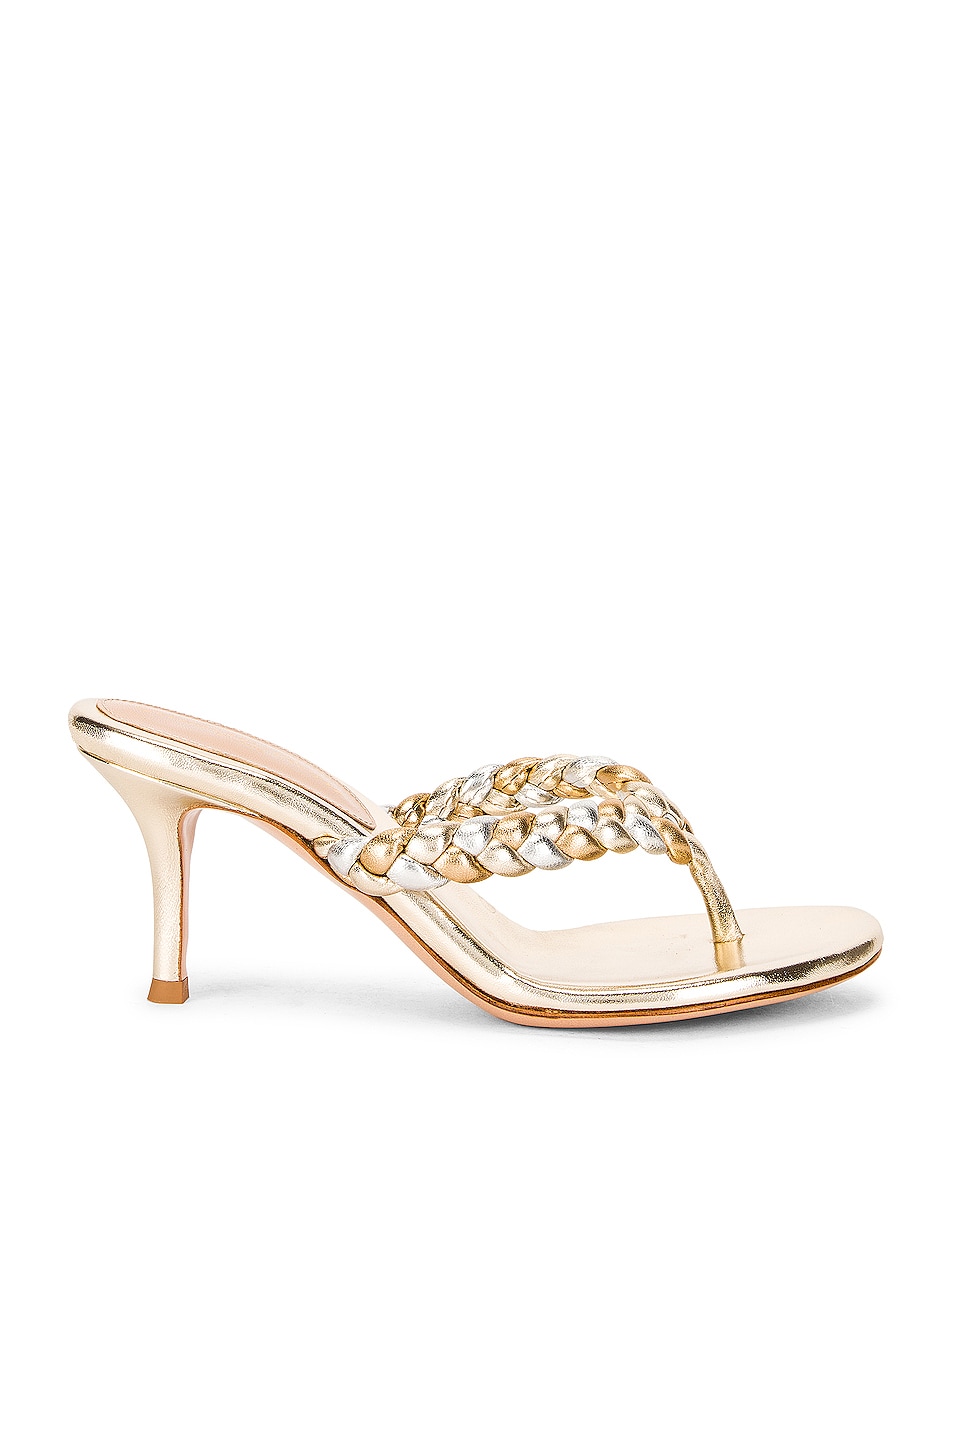 Image 1 of Gianvito Rossi Braid Thong Sandals in Platino & Mekong